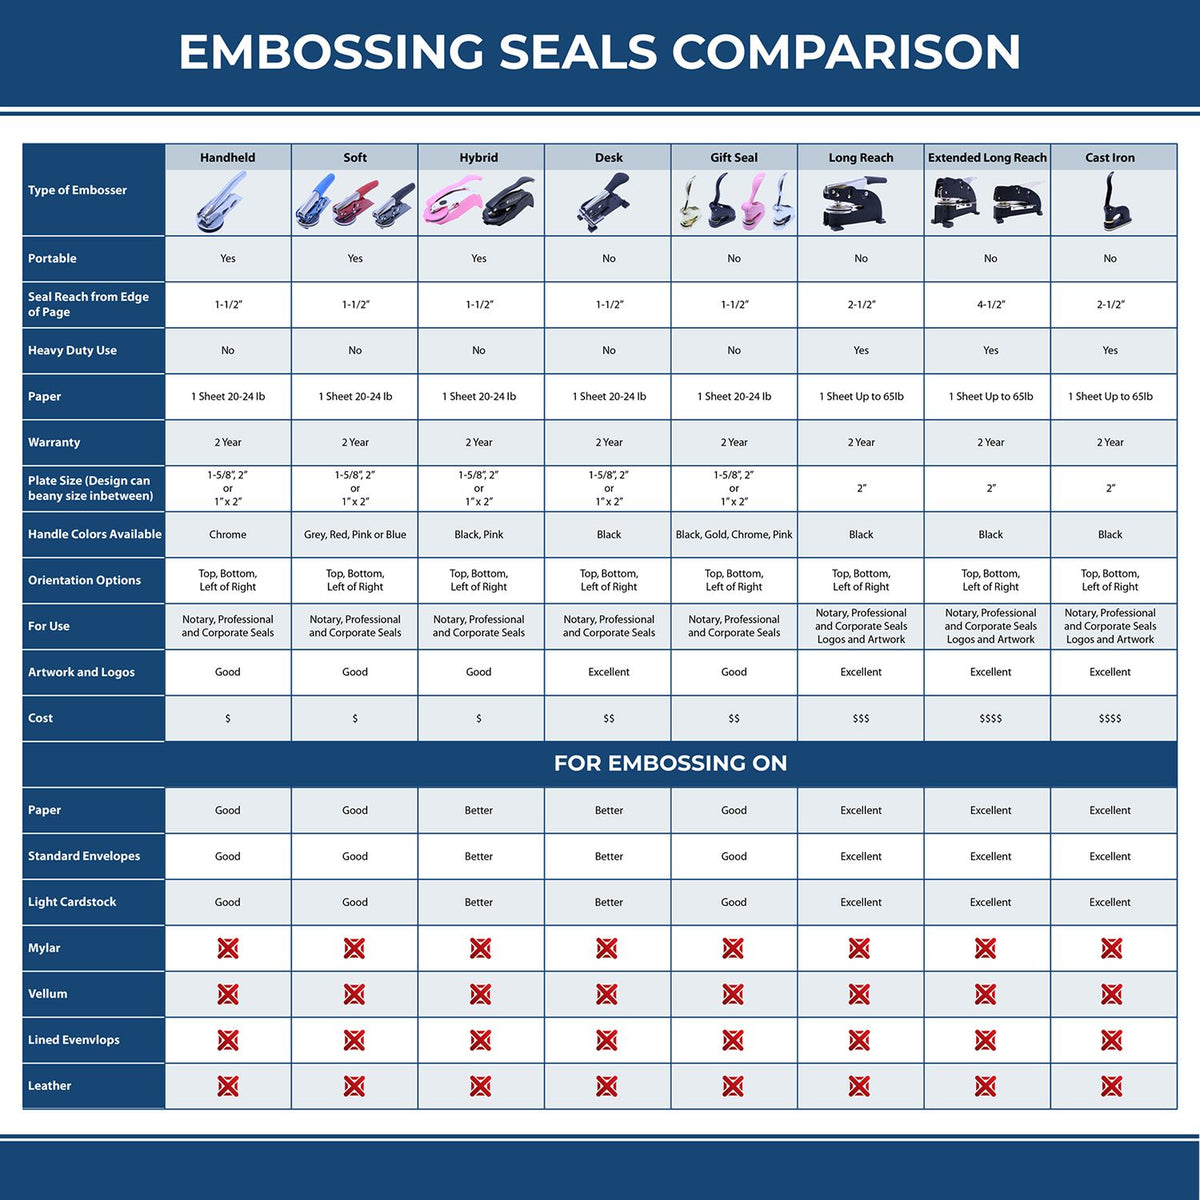 A comparison chart for the different types of mount models available for the Soft Maryland Professional Geologist Seal